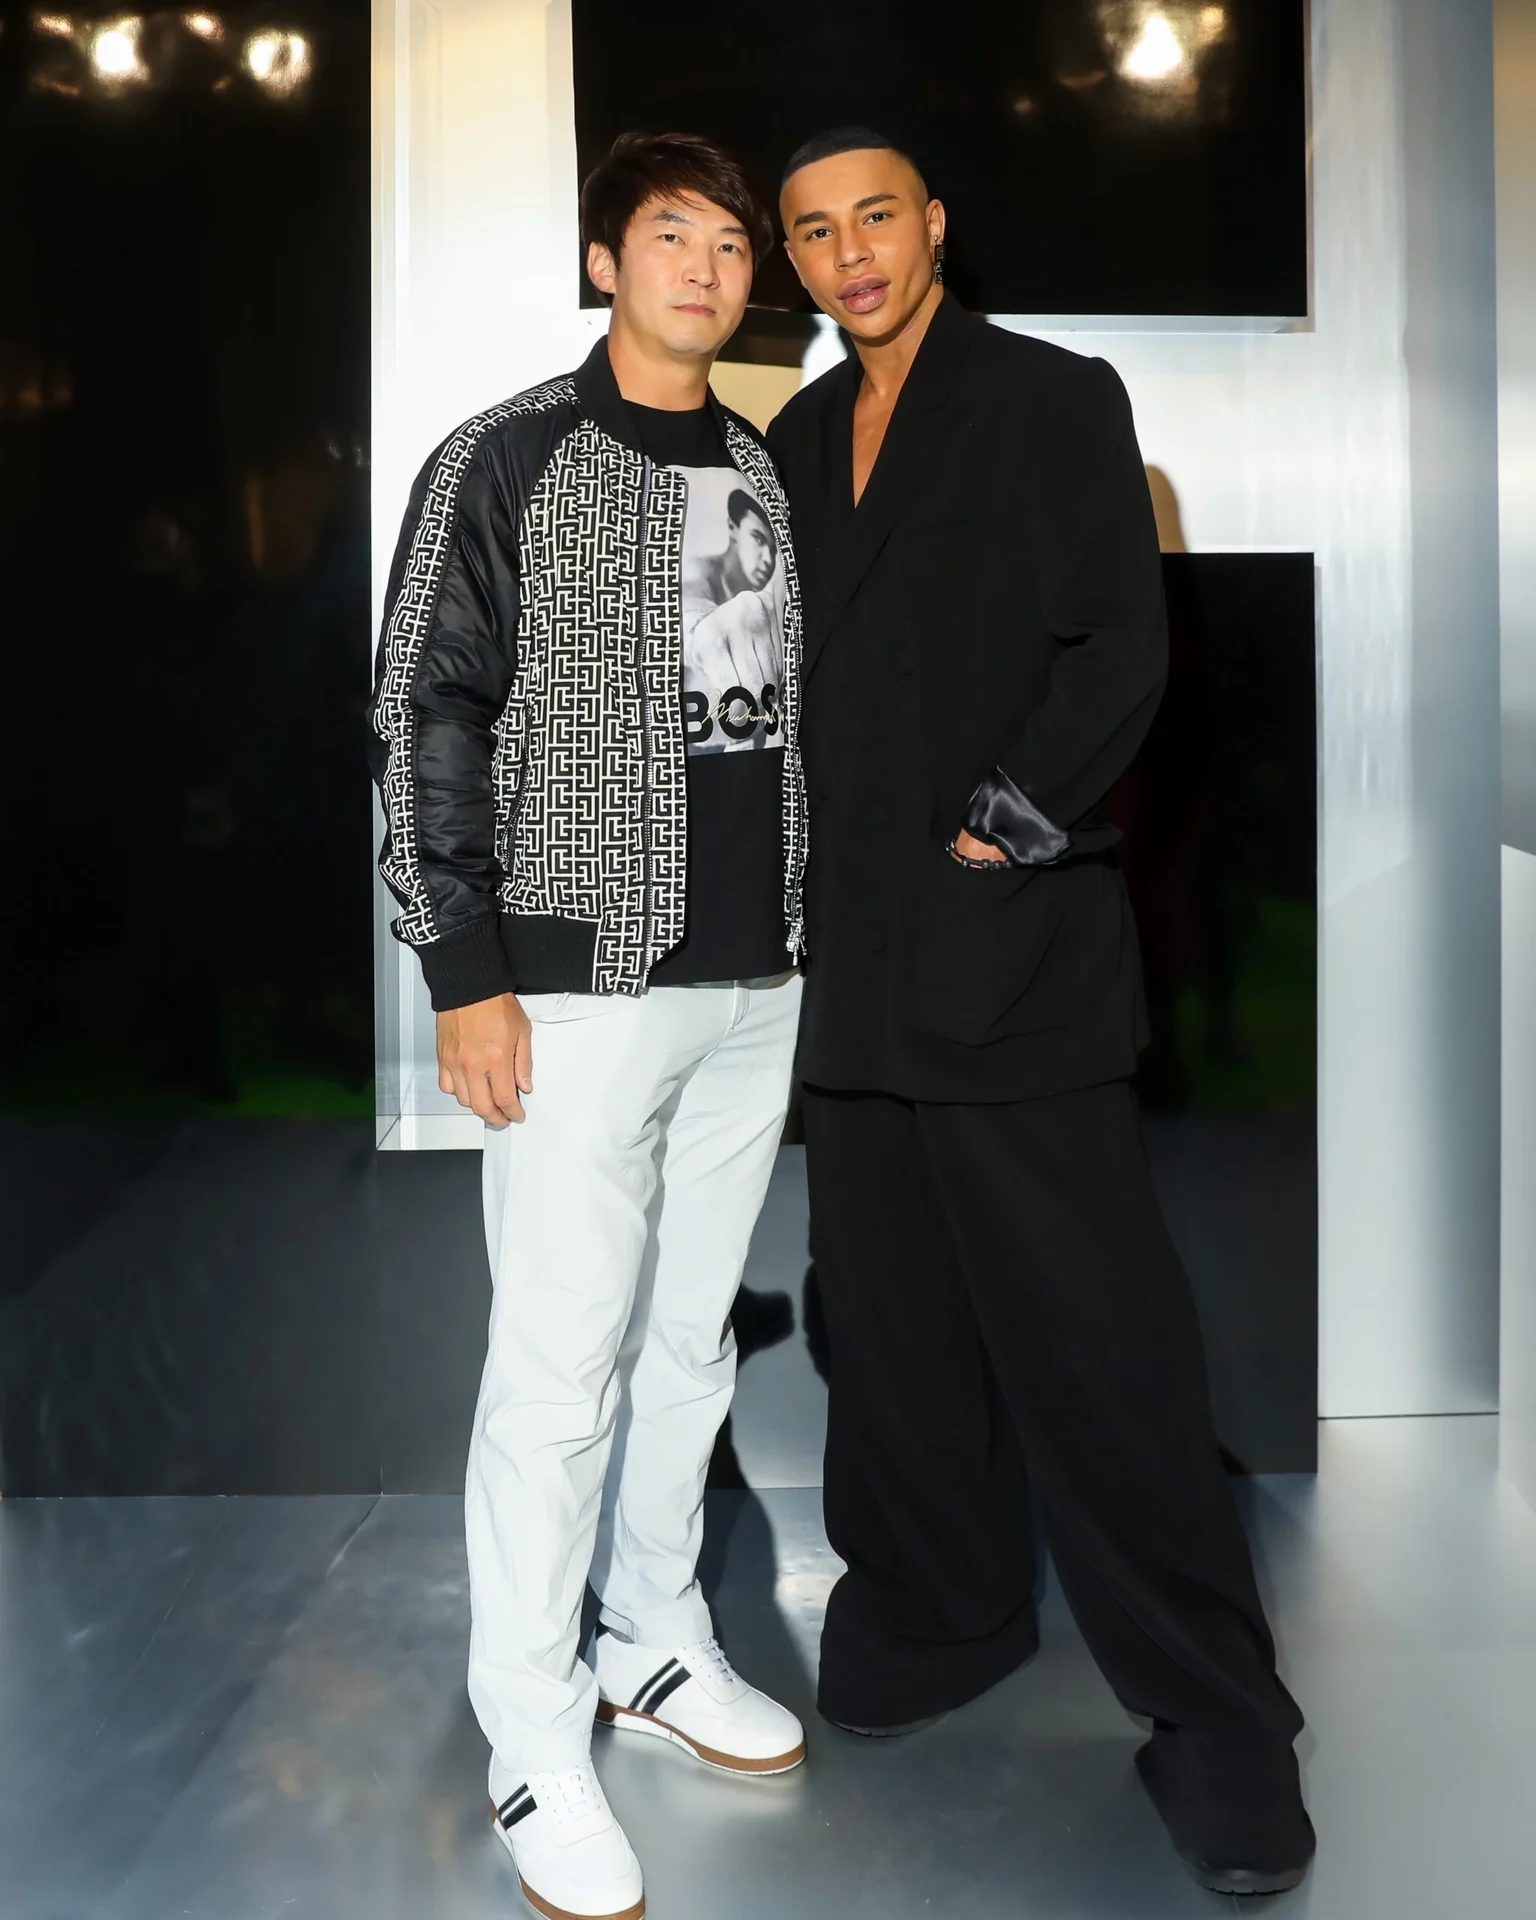 James Sun and Olivier Rousteing